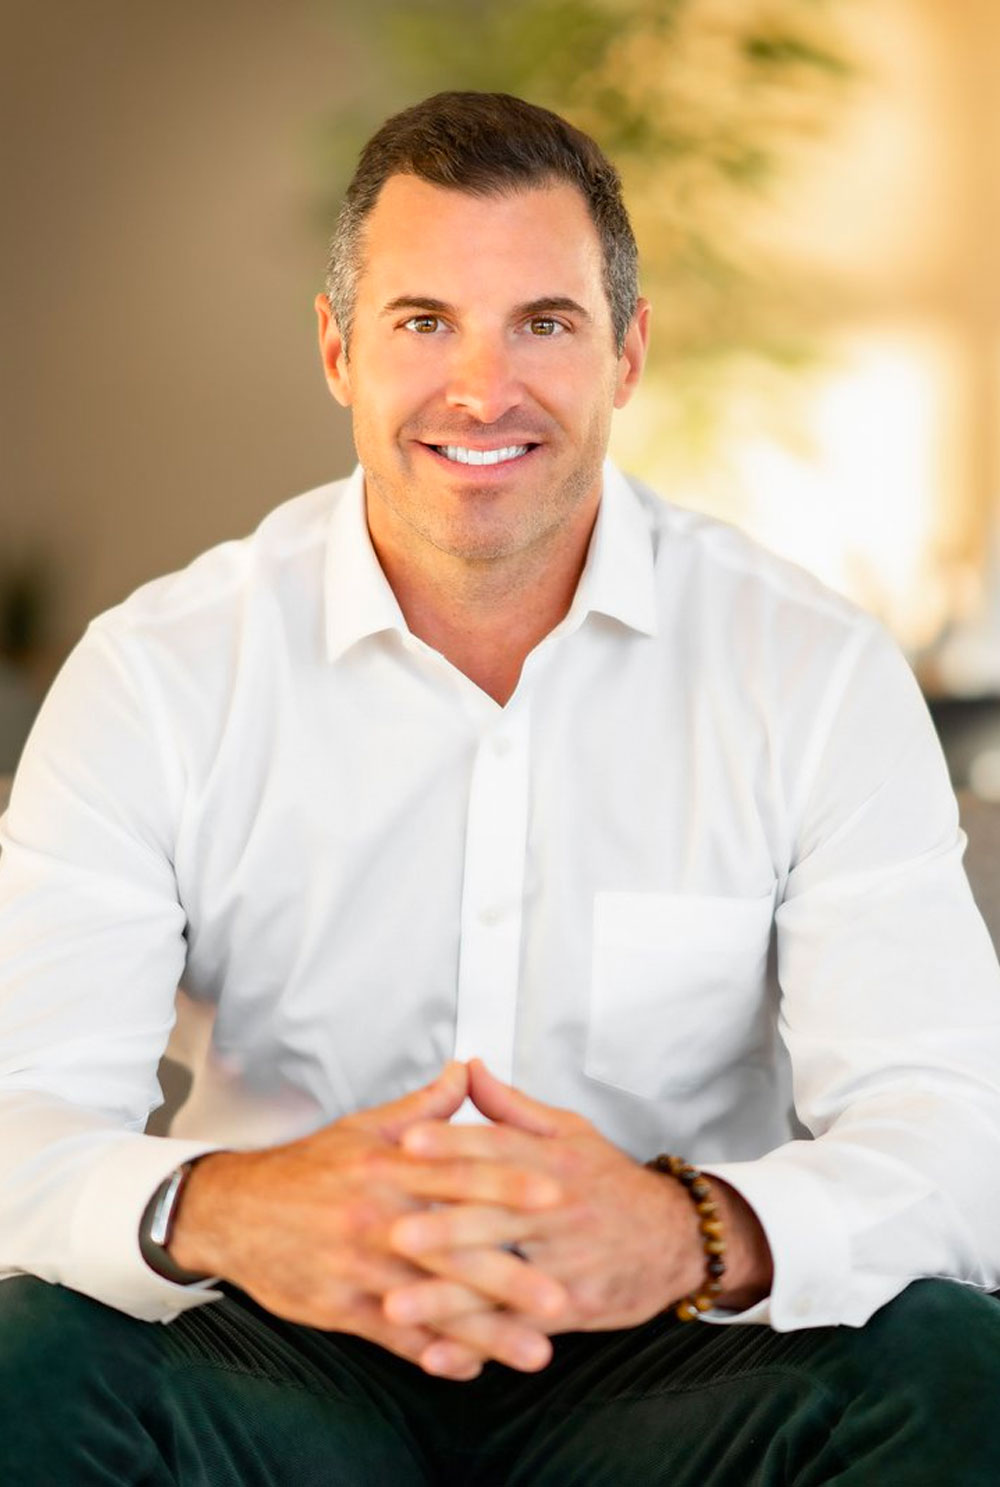 graham doerge ceo and founder